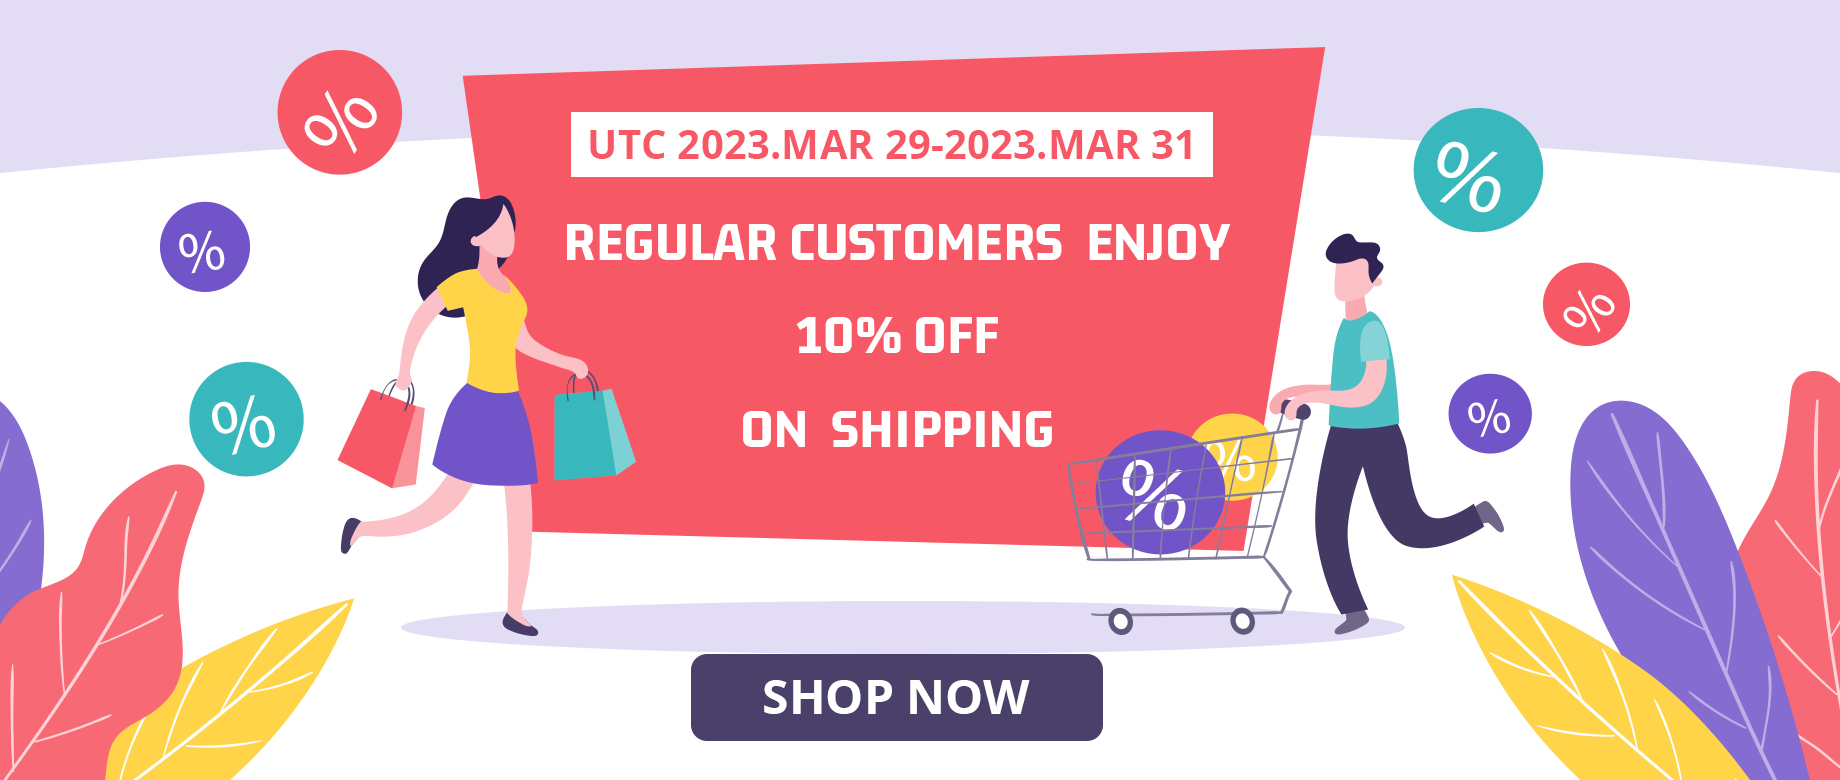 10% off on shipping